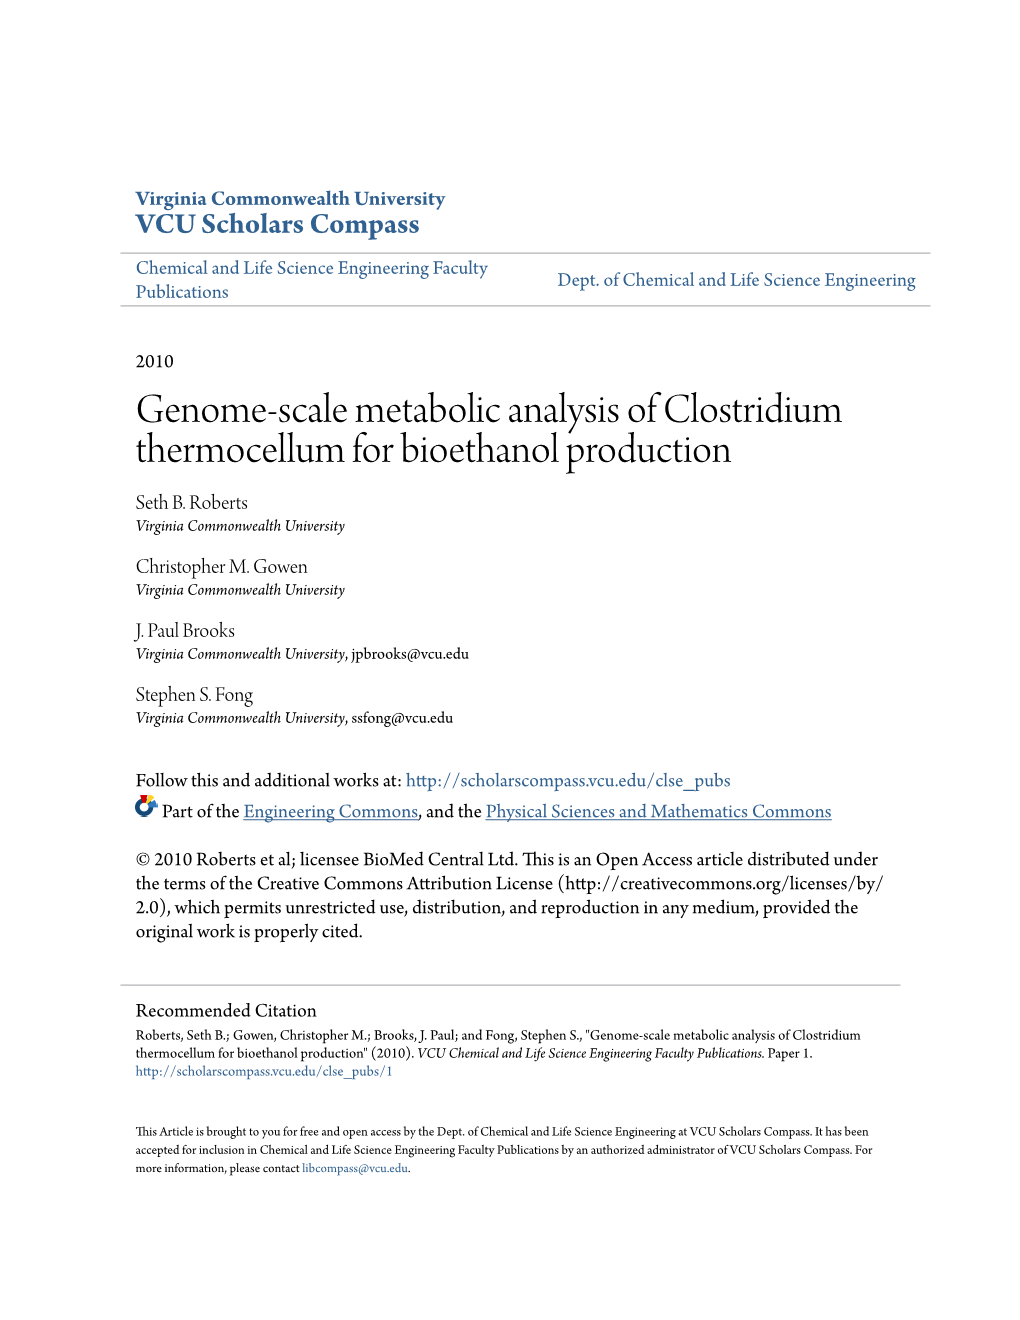 Genome-Scale Metabolic Analysis of Clostridium Thermocellum for Bioethanol Production Seth B